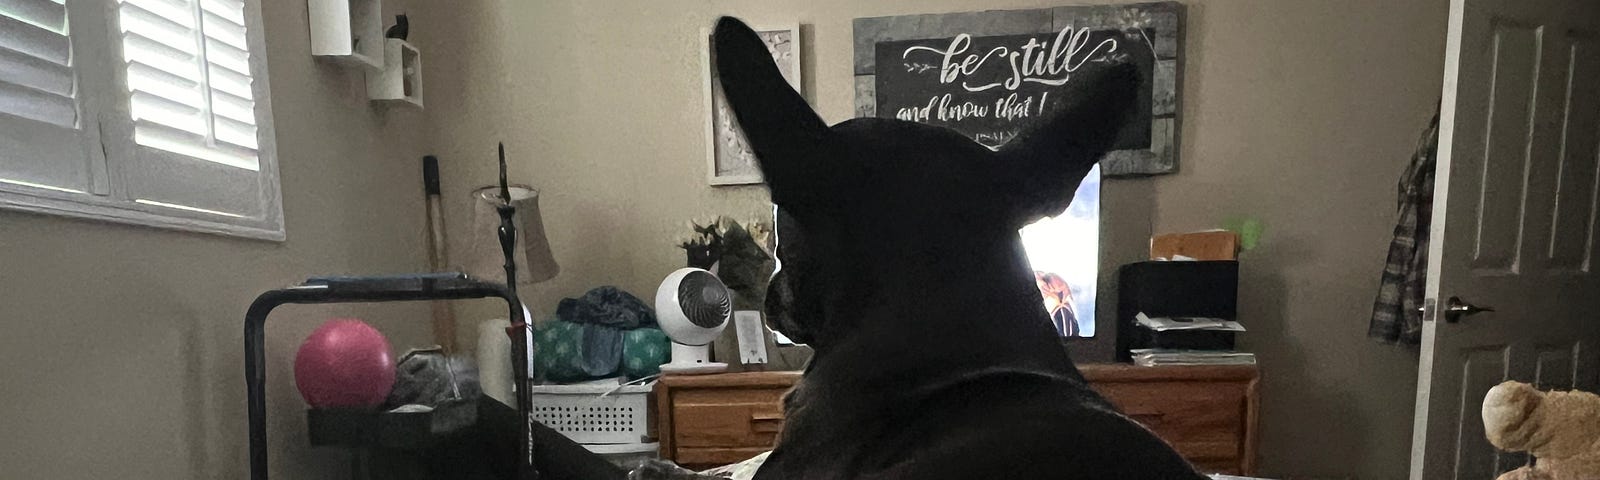 A black dog laying on top of a person and blocking their view of the television.